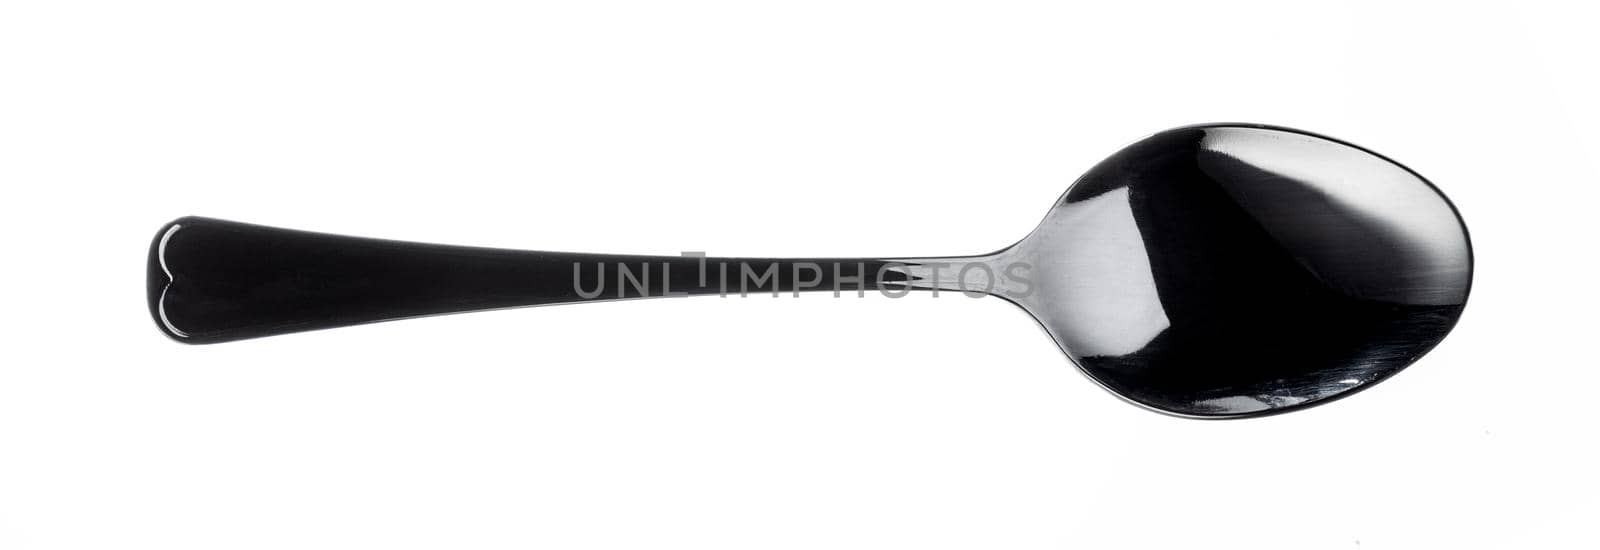 Plastic black spoon isolated on a white background by Fabrikasimf